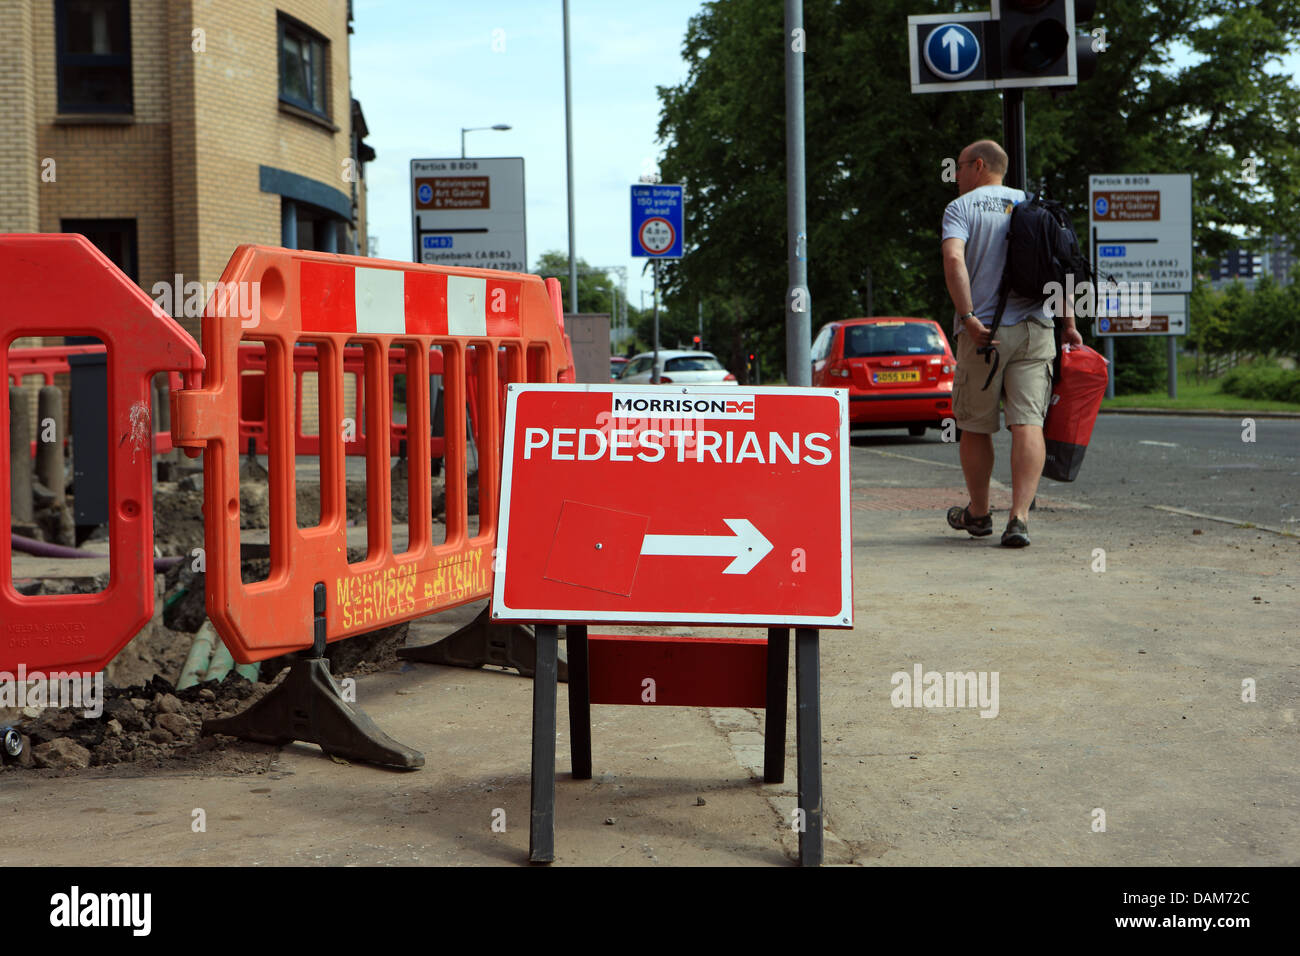 Pedestrians sign with arrow showing diverted route for pedestrians Stock Photo